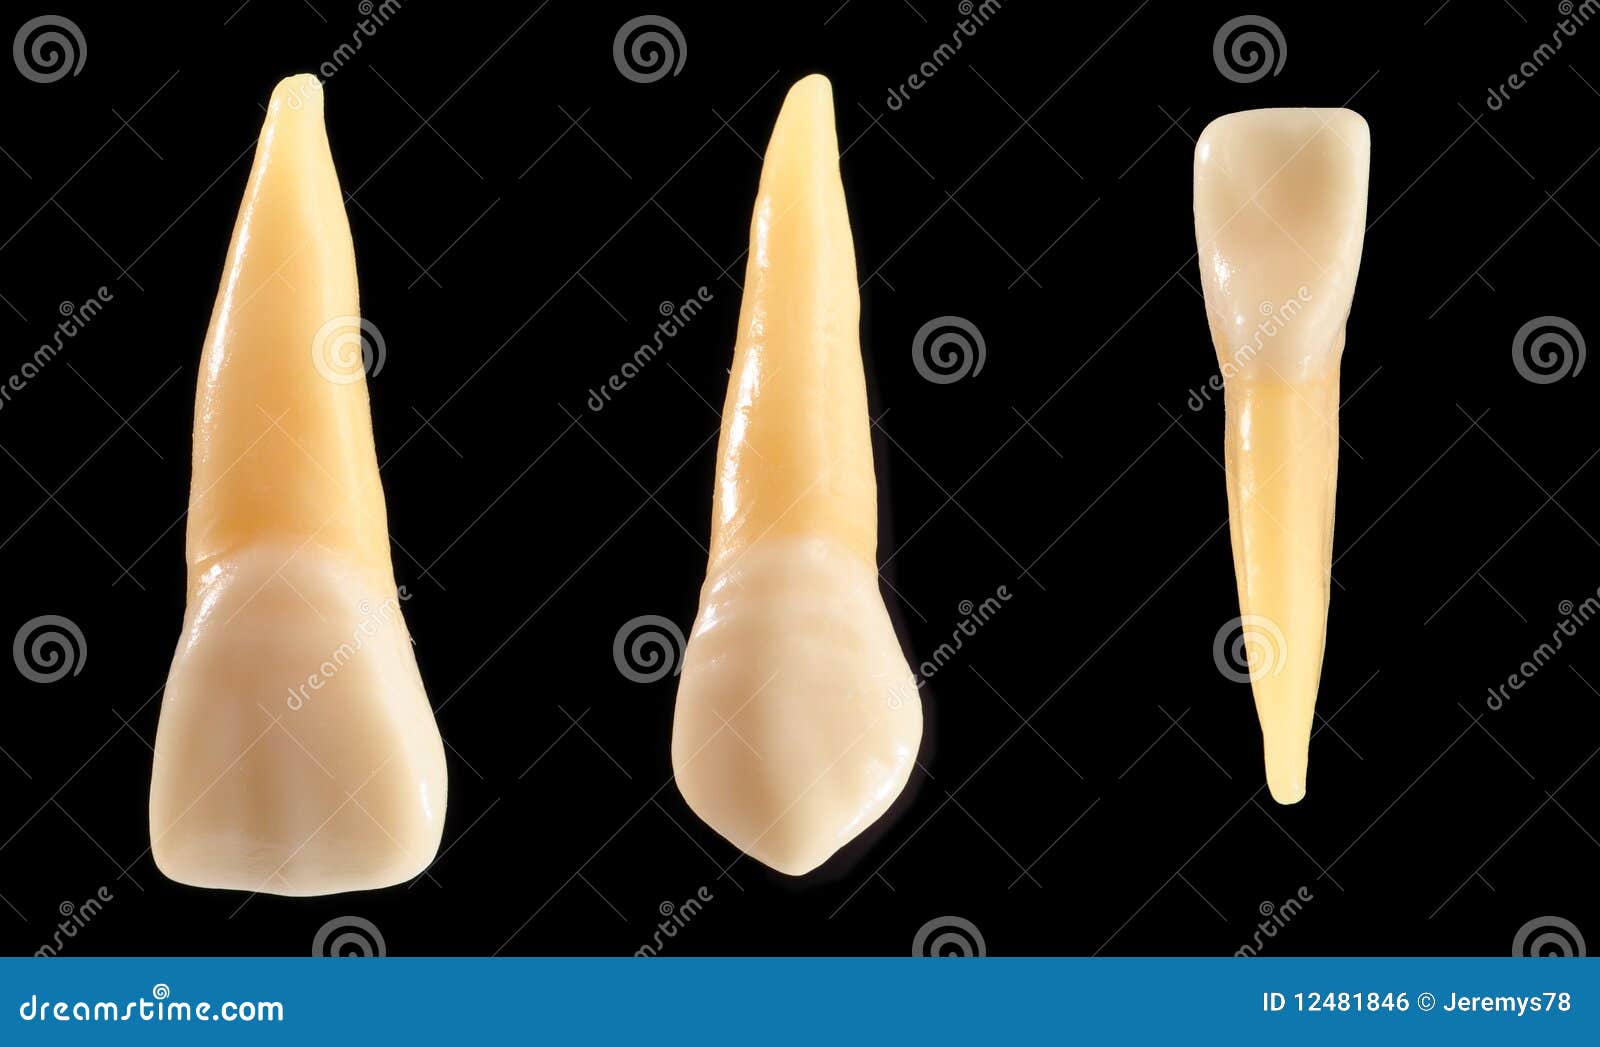 incisor and canine teeth  on black